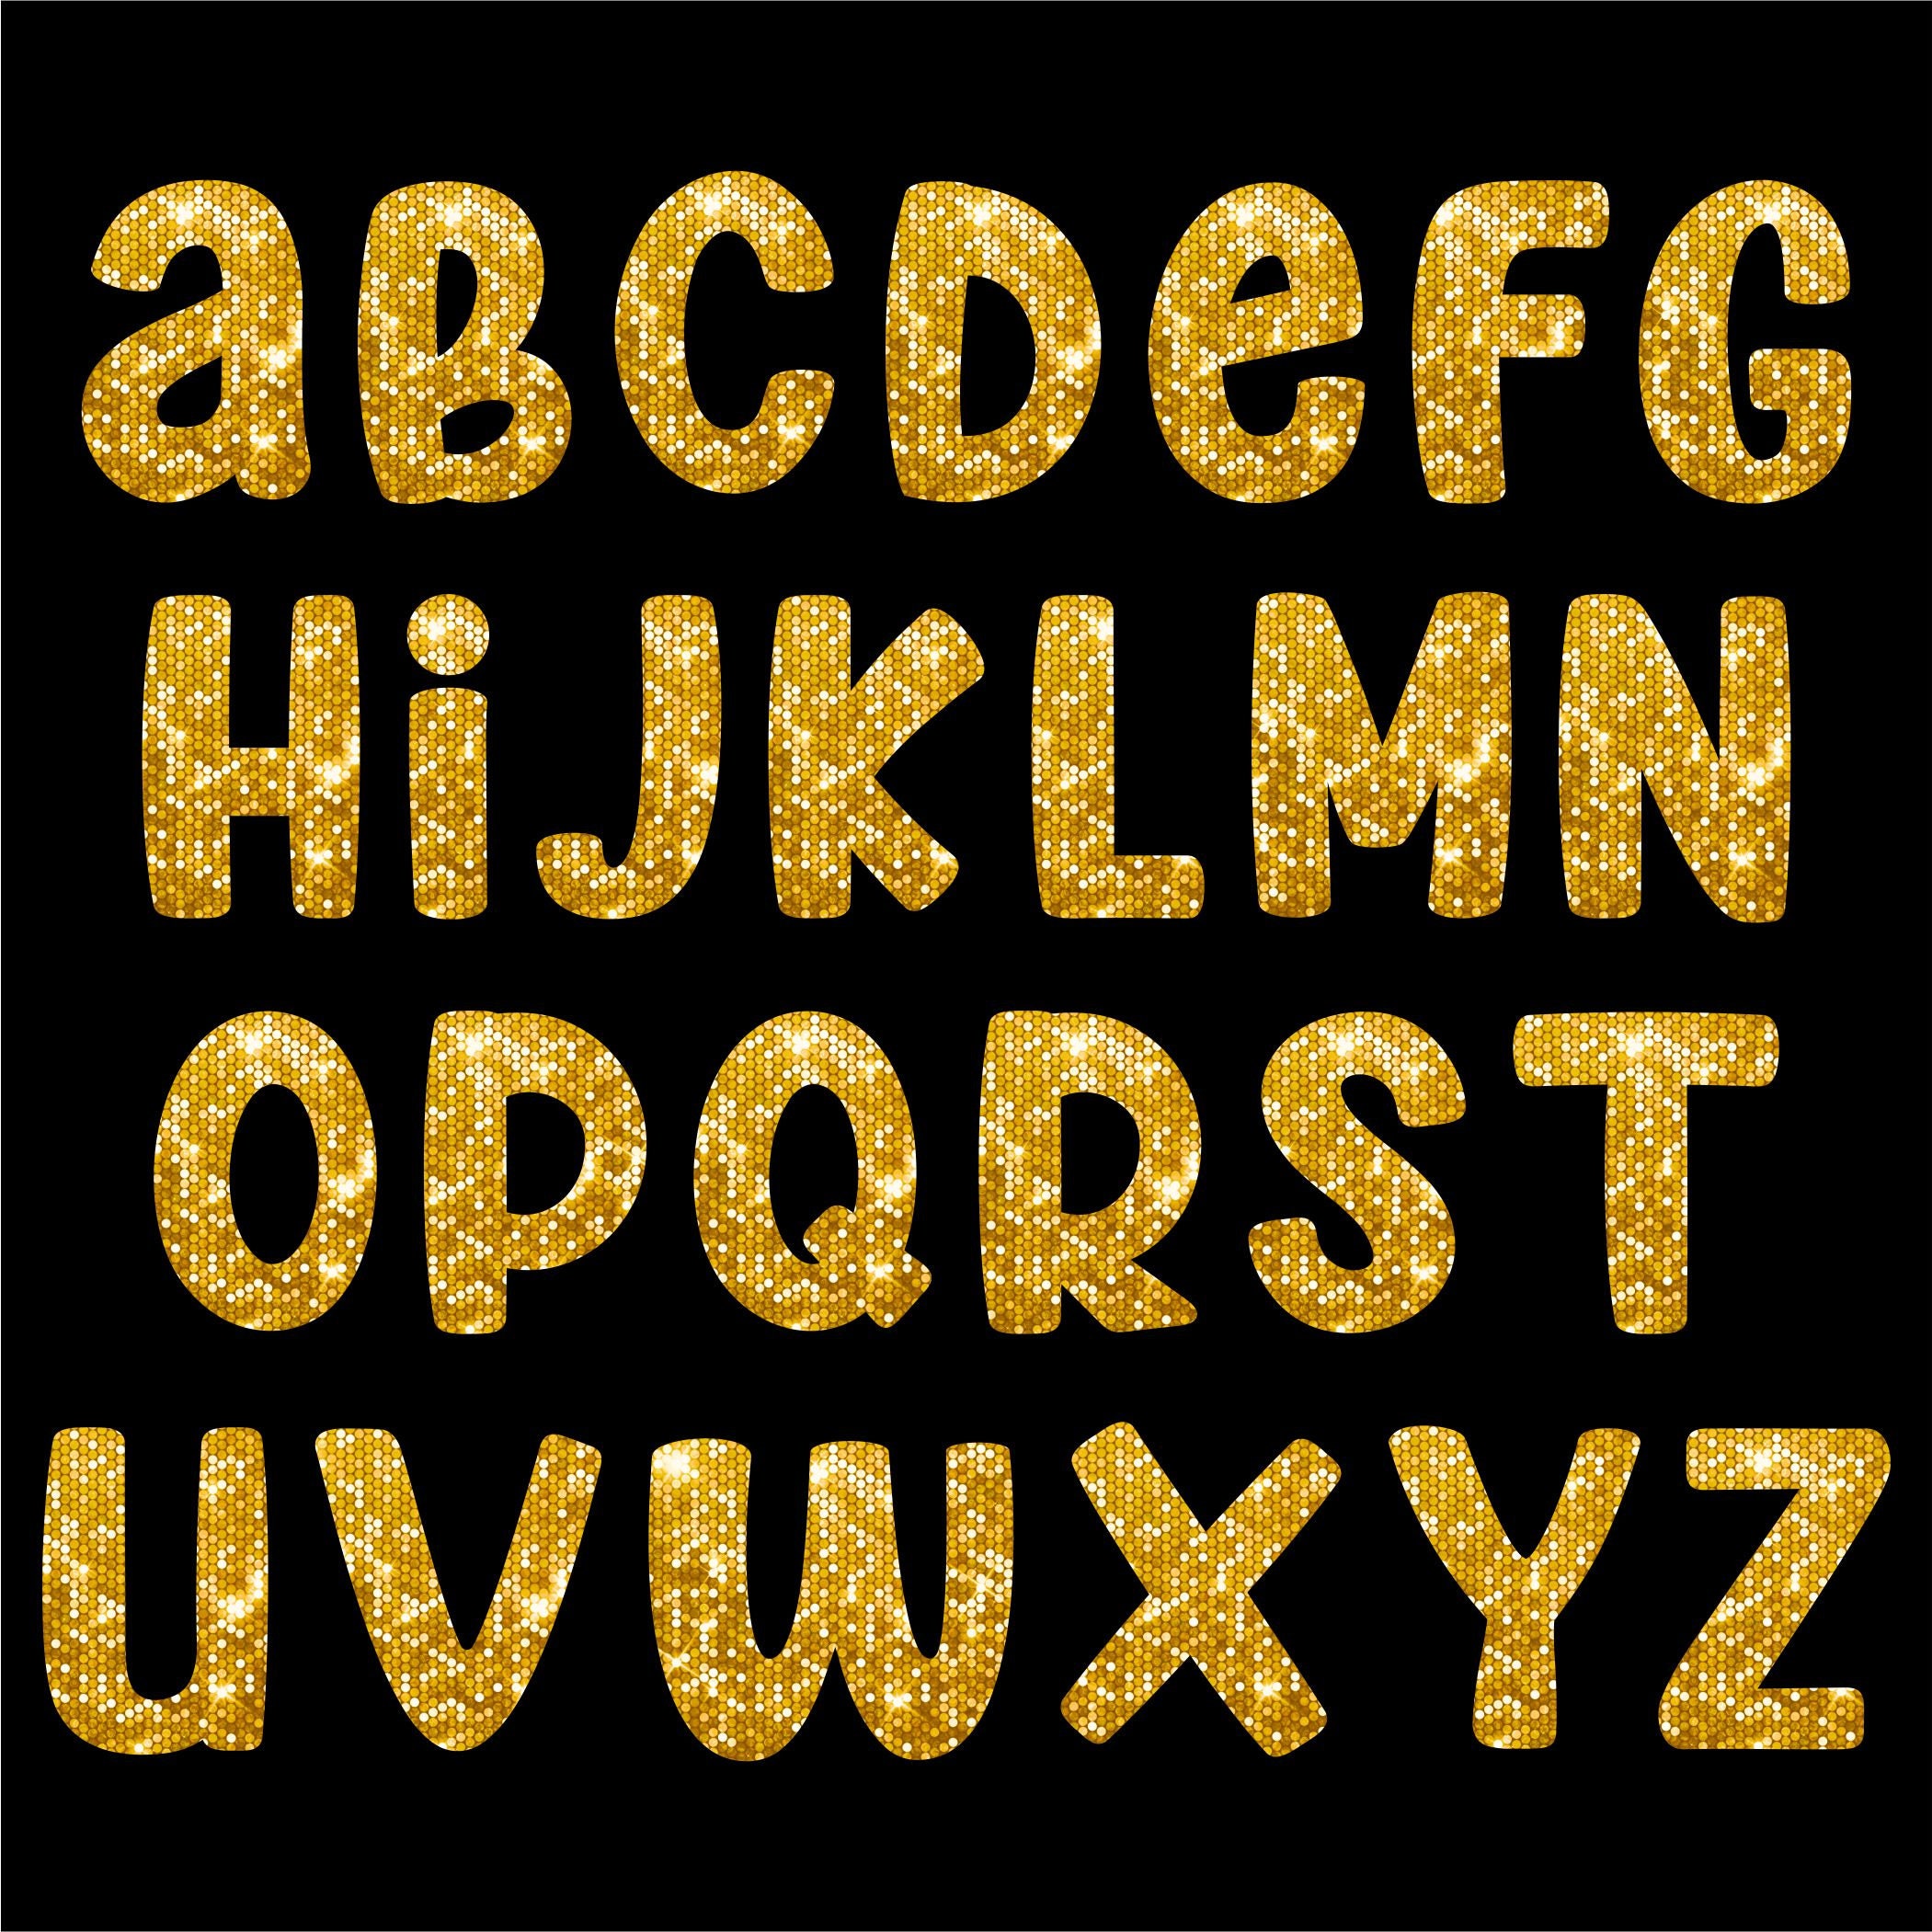 Golden Sparkle Glitter Rhinestone Alphabet Letters Numbers And Signs  Currency Stock Illustration - Download Image Now - iStock